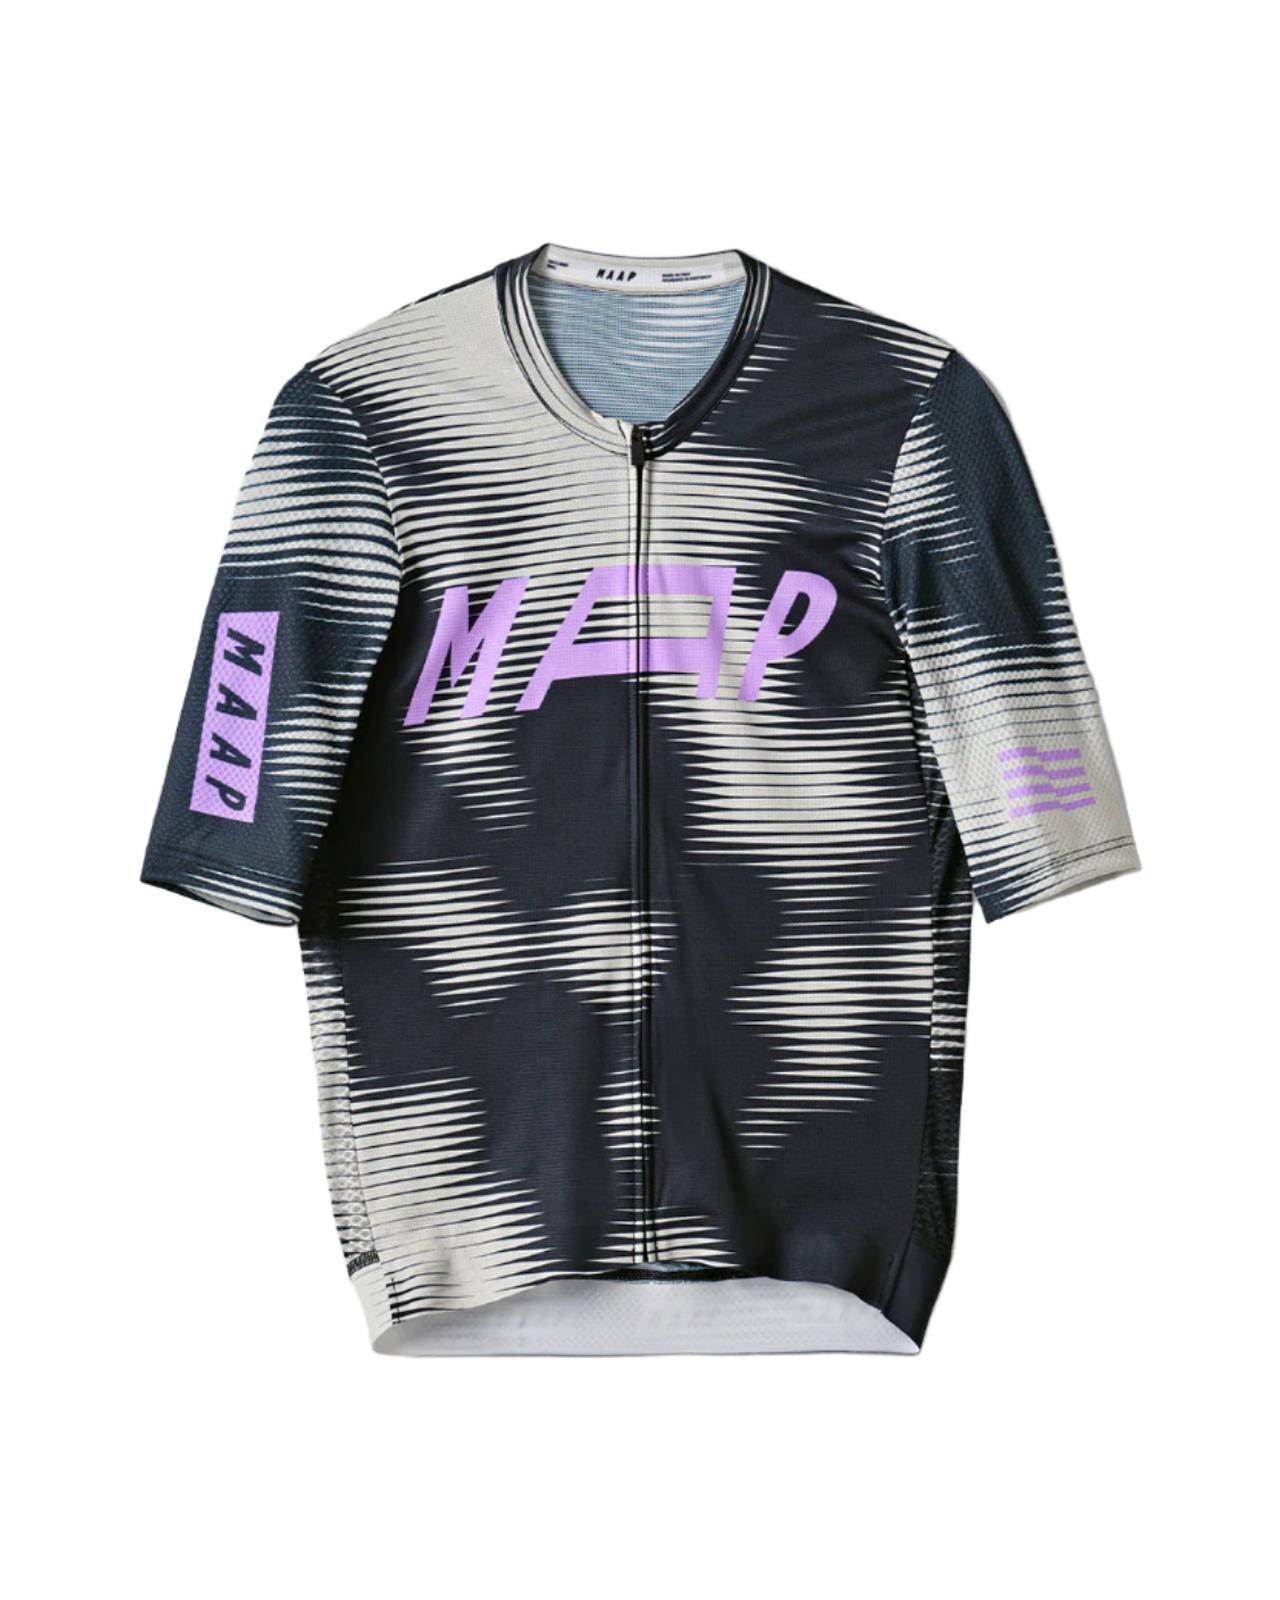 Privateer A.N Pro Jersey - Black/Grey